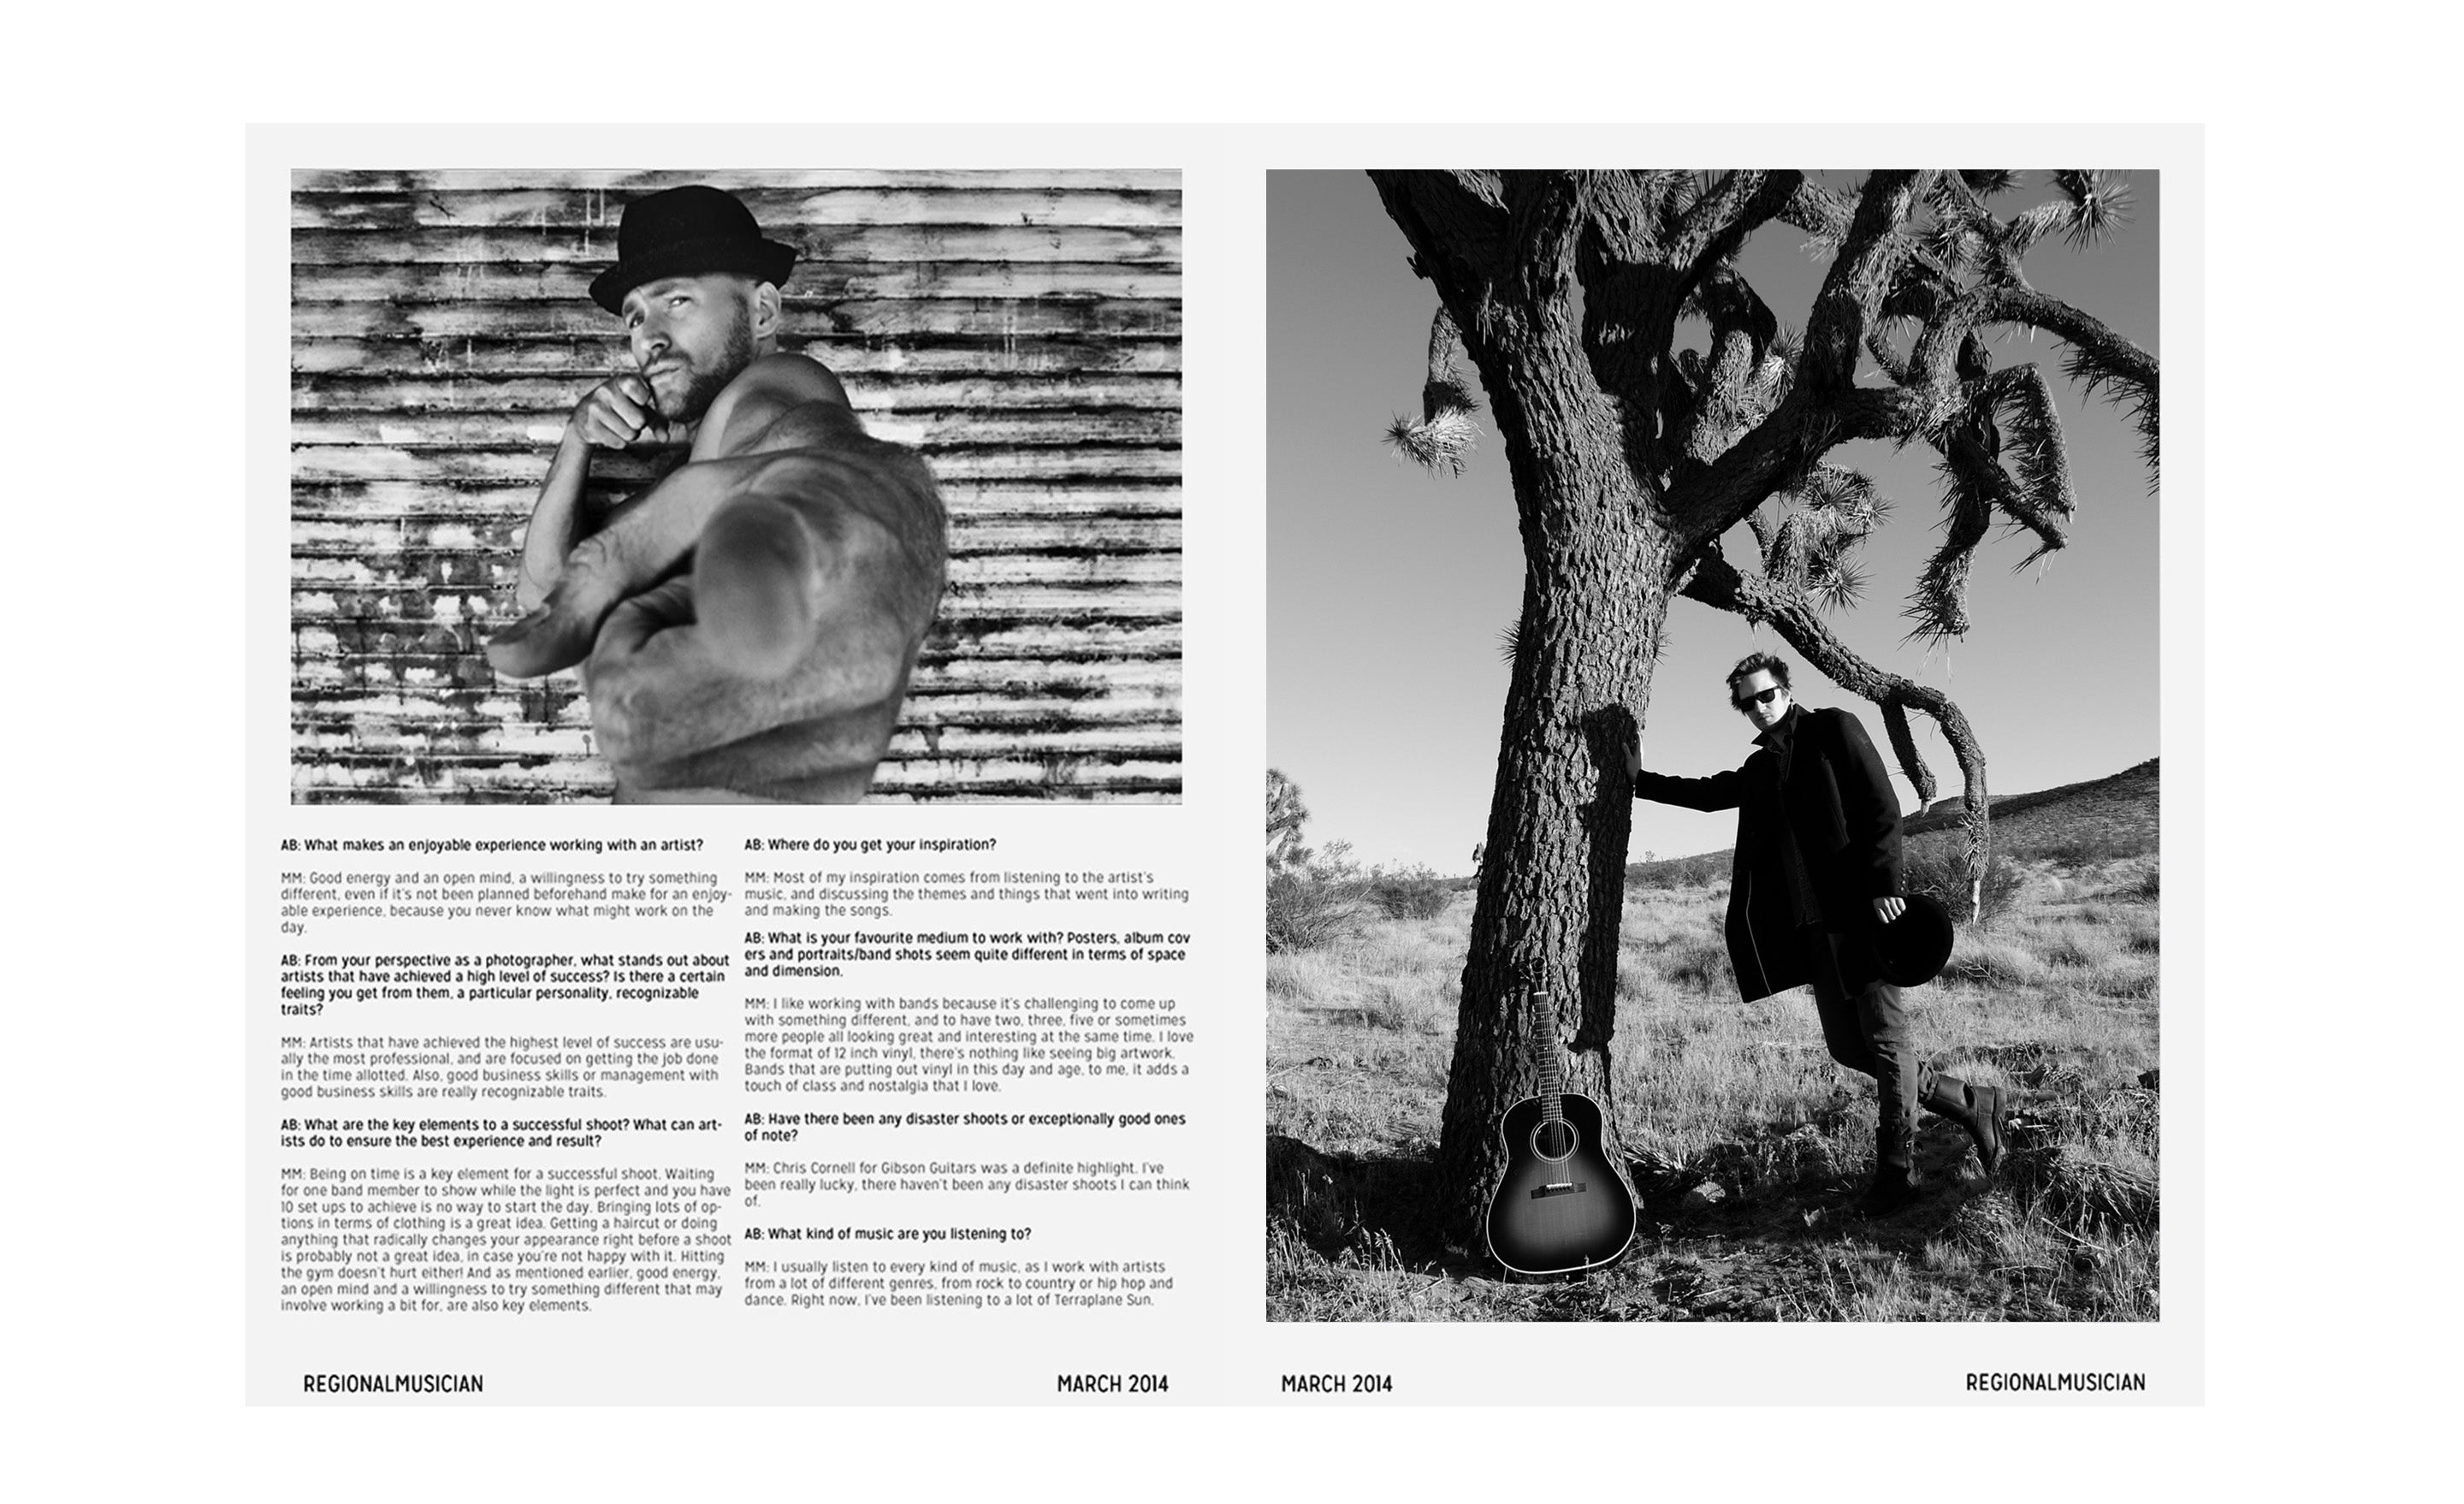 Interview with Photographer Mark Maryanovich Regional Musician Magazine page 3 black and white portrait rapper against metal wall pointing finger at camera in closeup black and white image of musician with arm outstretched leaning on tree with guitar placed in front on opposite side